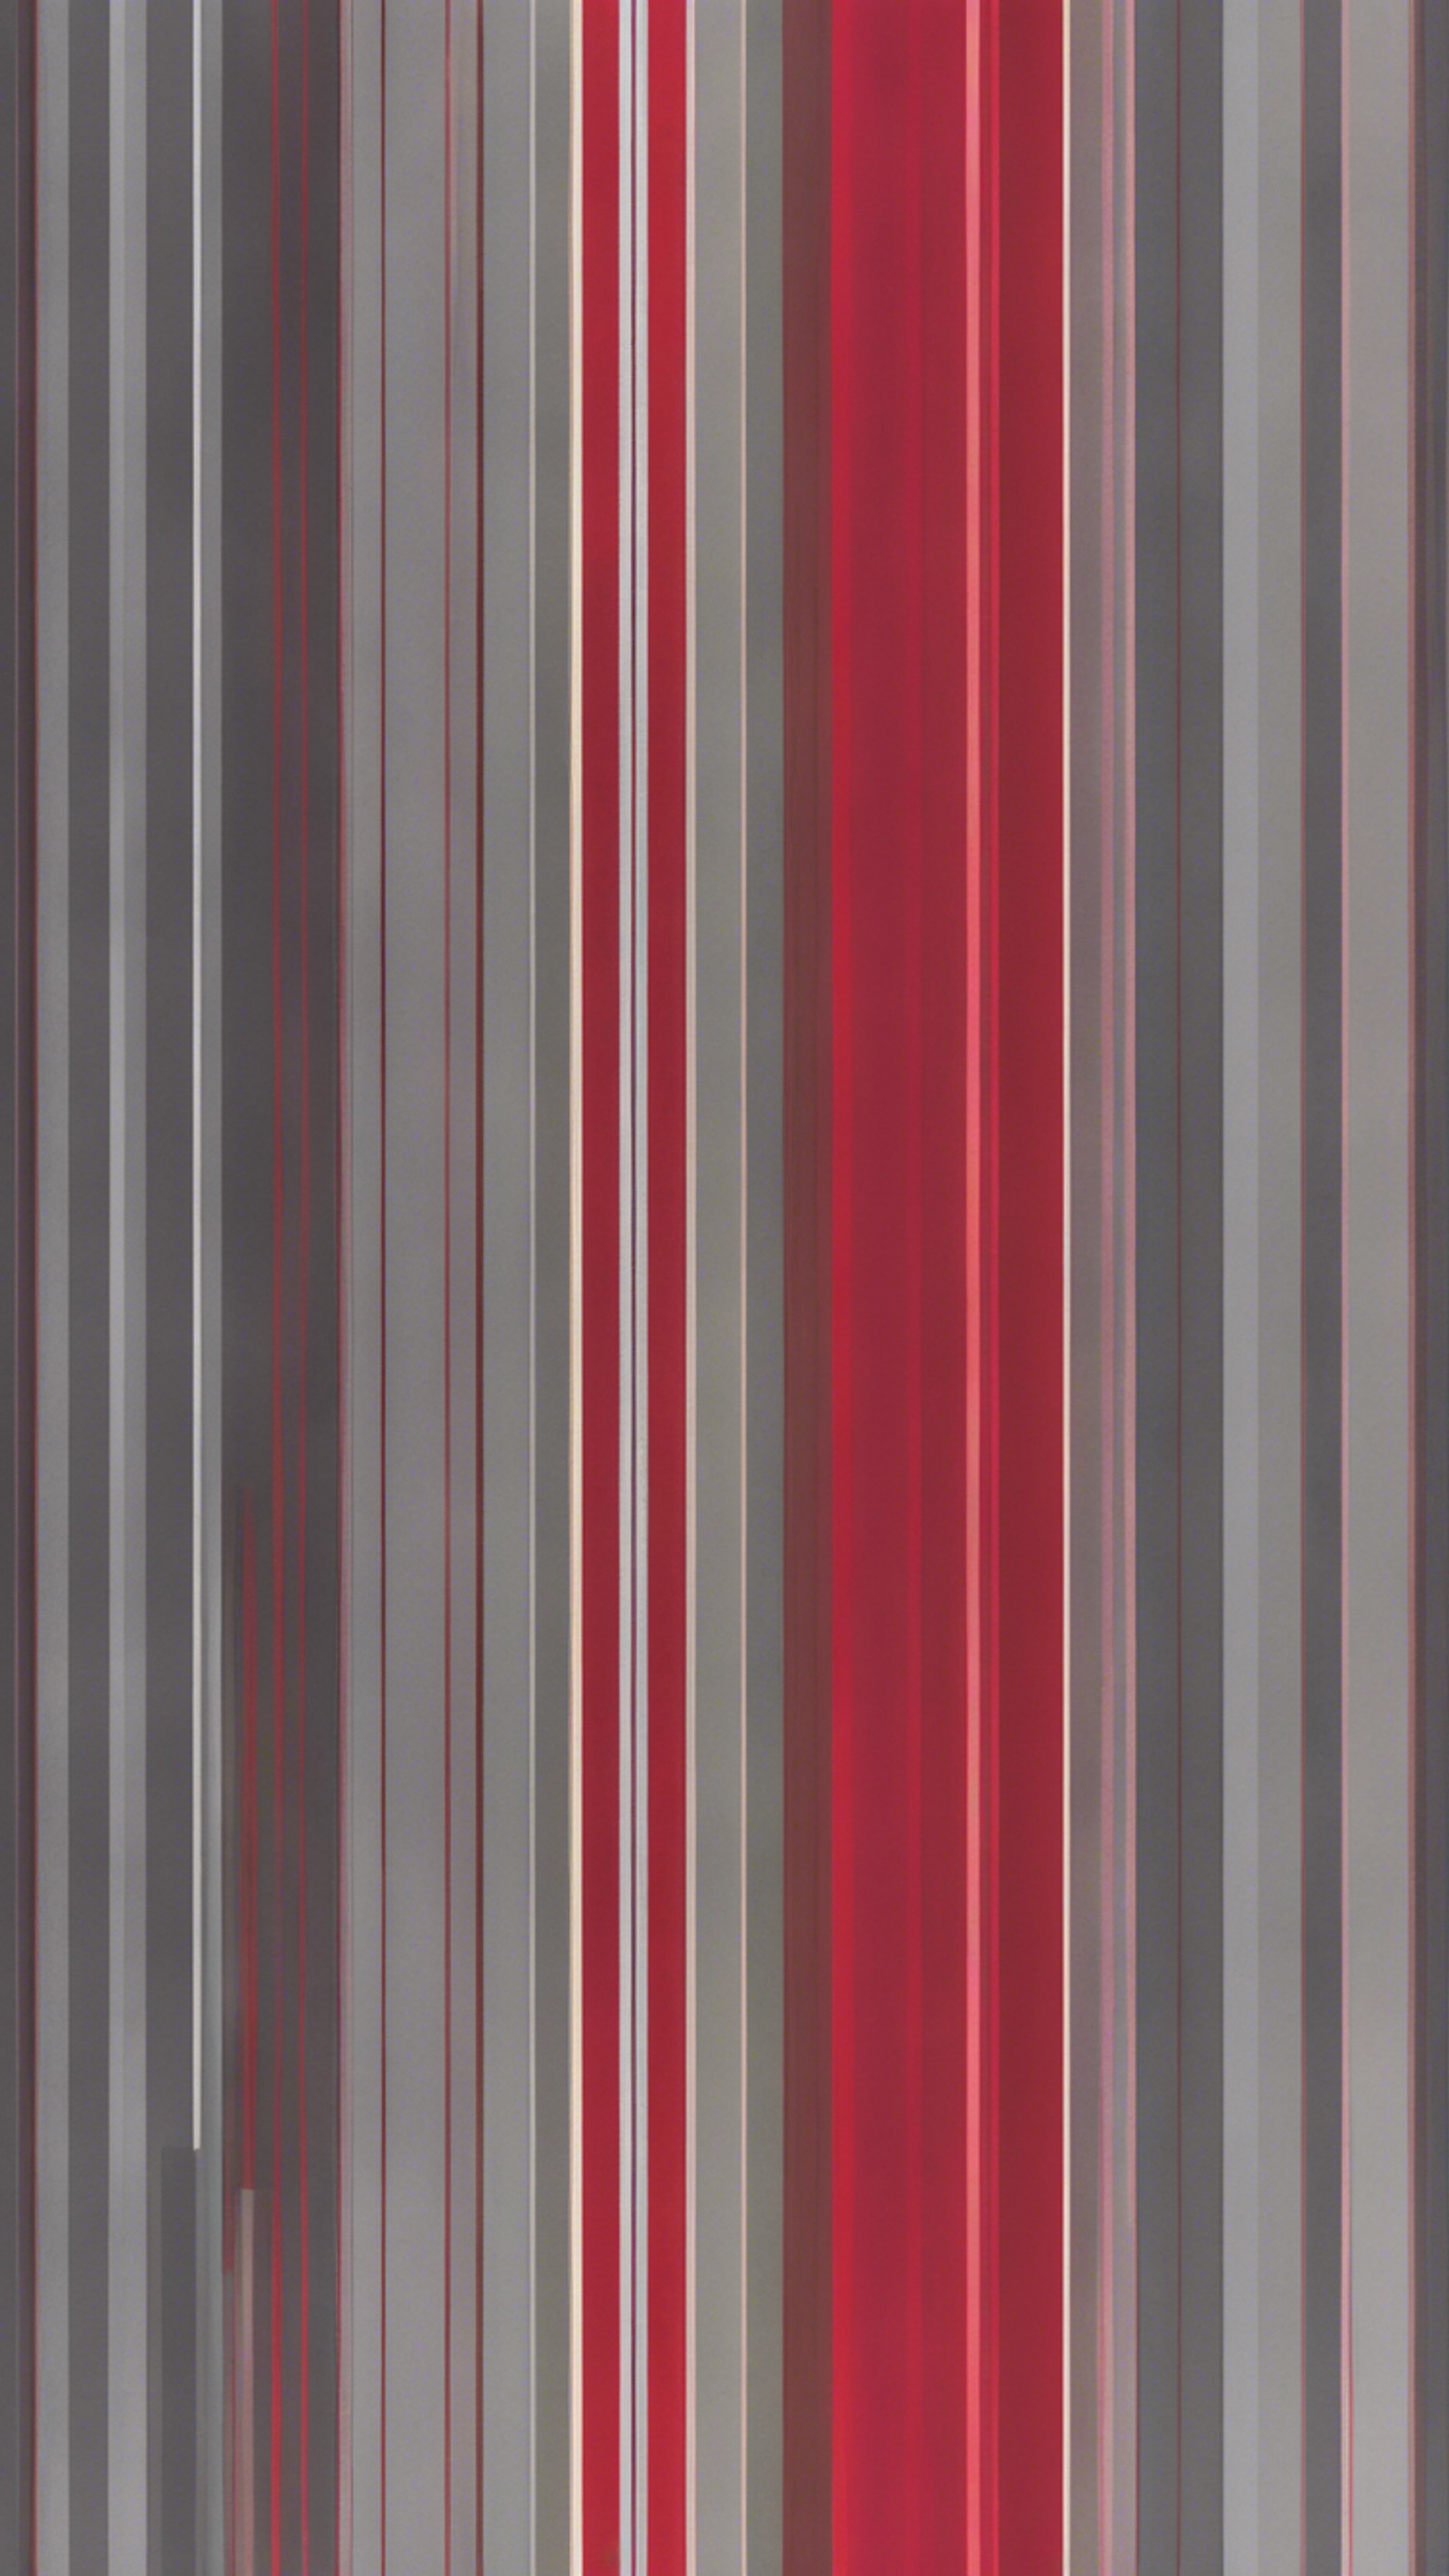 Pattern inspired by modern art, showcasing alternating bands of red and grey in a gradient arrangement. Fond d'écran[fecd92d91f0c4817b510]